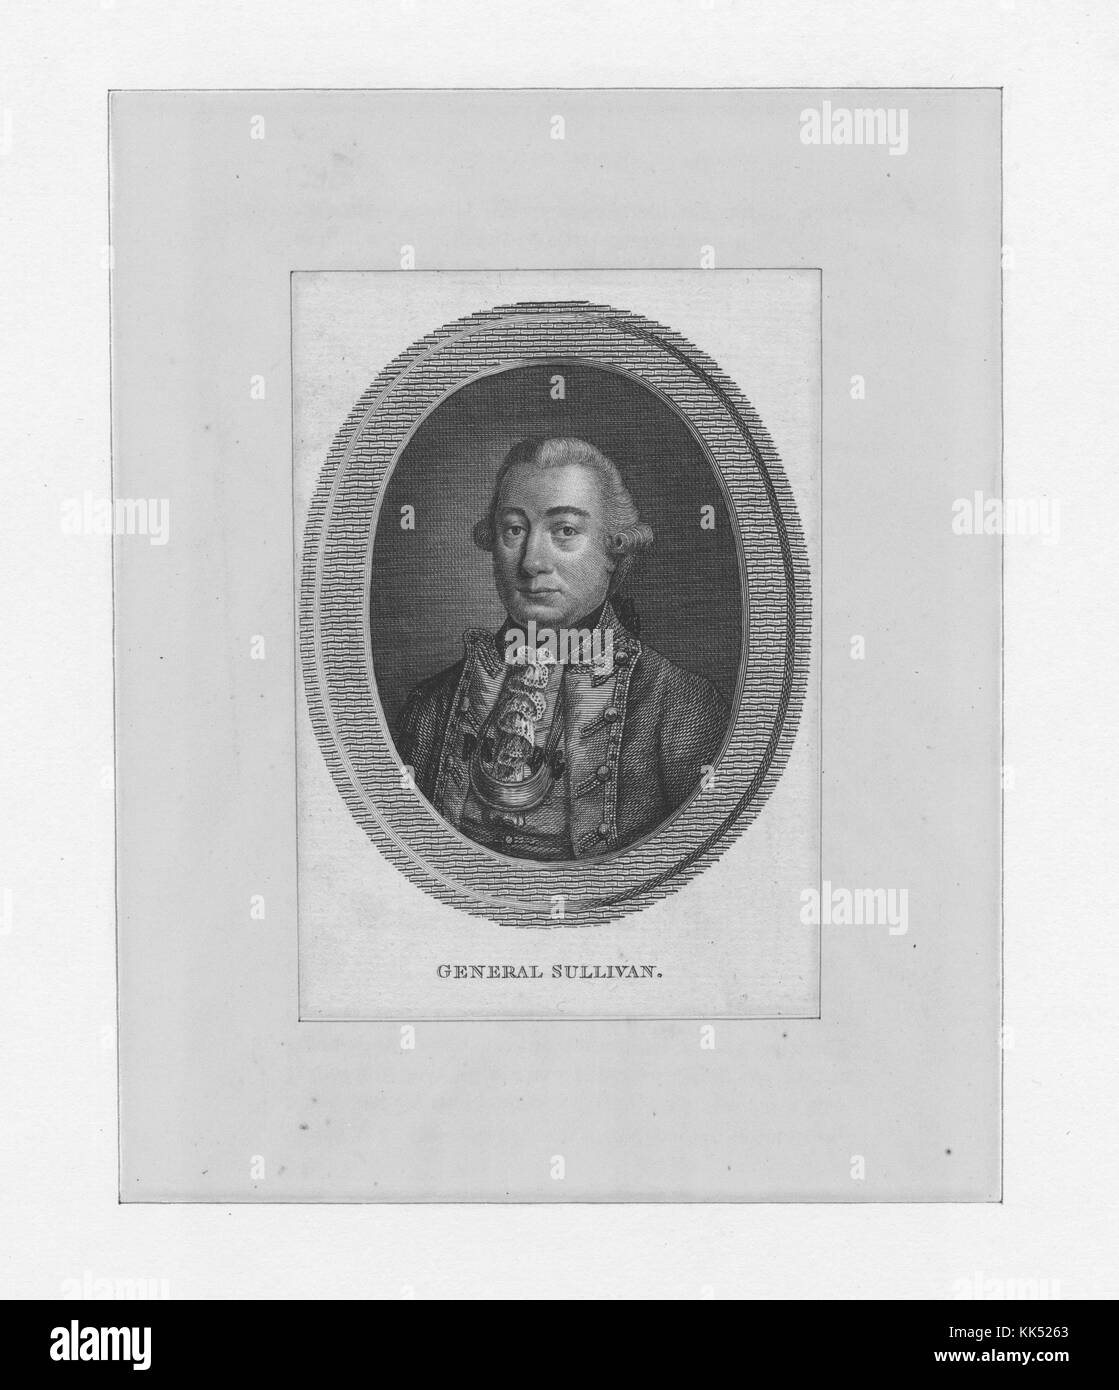 Engraved portrait of General John Sullivan, an American General in the Revolutionary War, a delegate in the Continental Congress, Governor of New Hampshire and a United States federal judge, in uniform, set in an oval, 1800. From the New York Public Library. Stock Photo